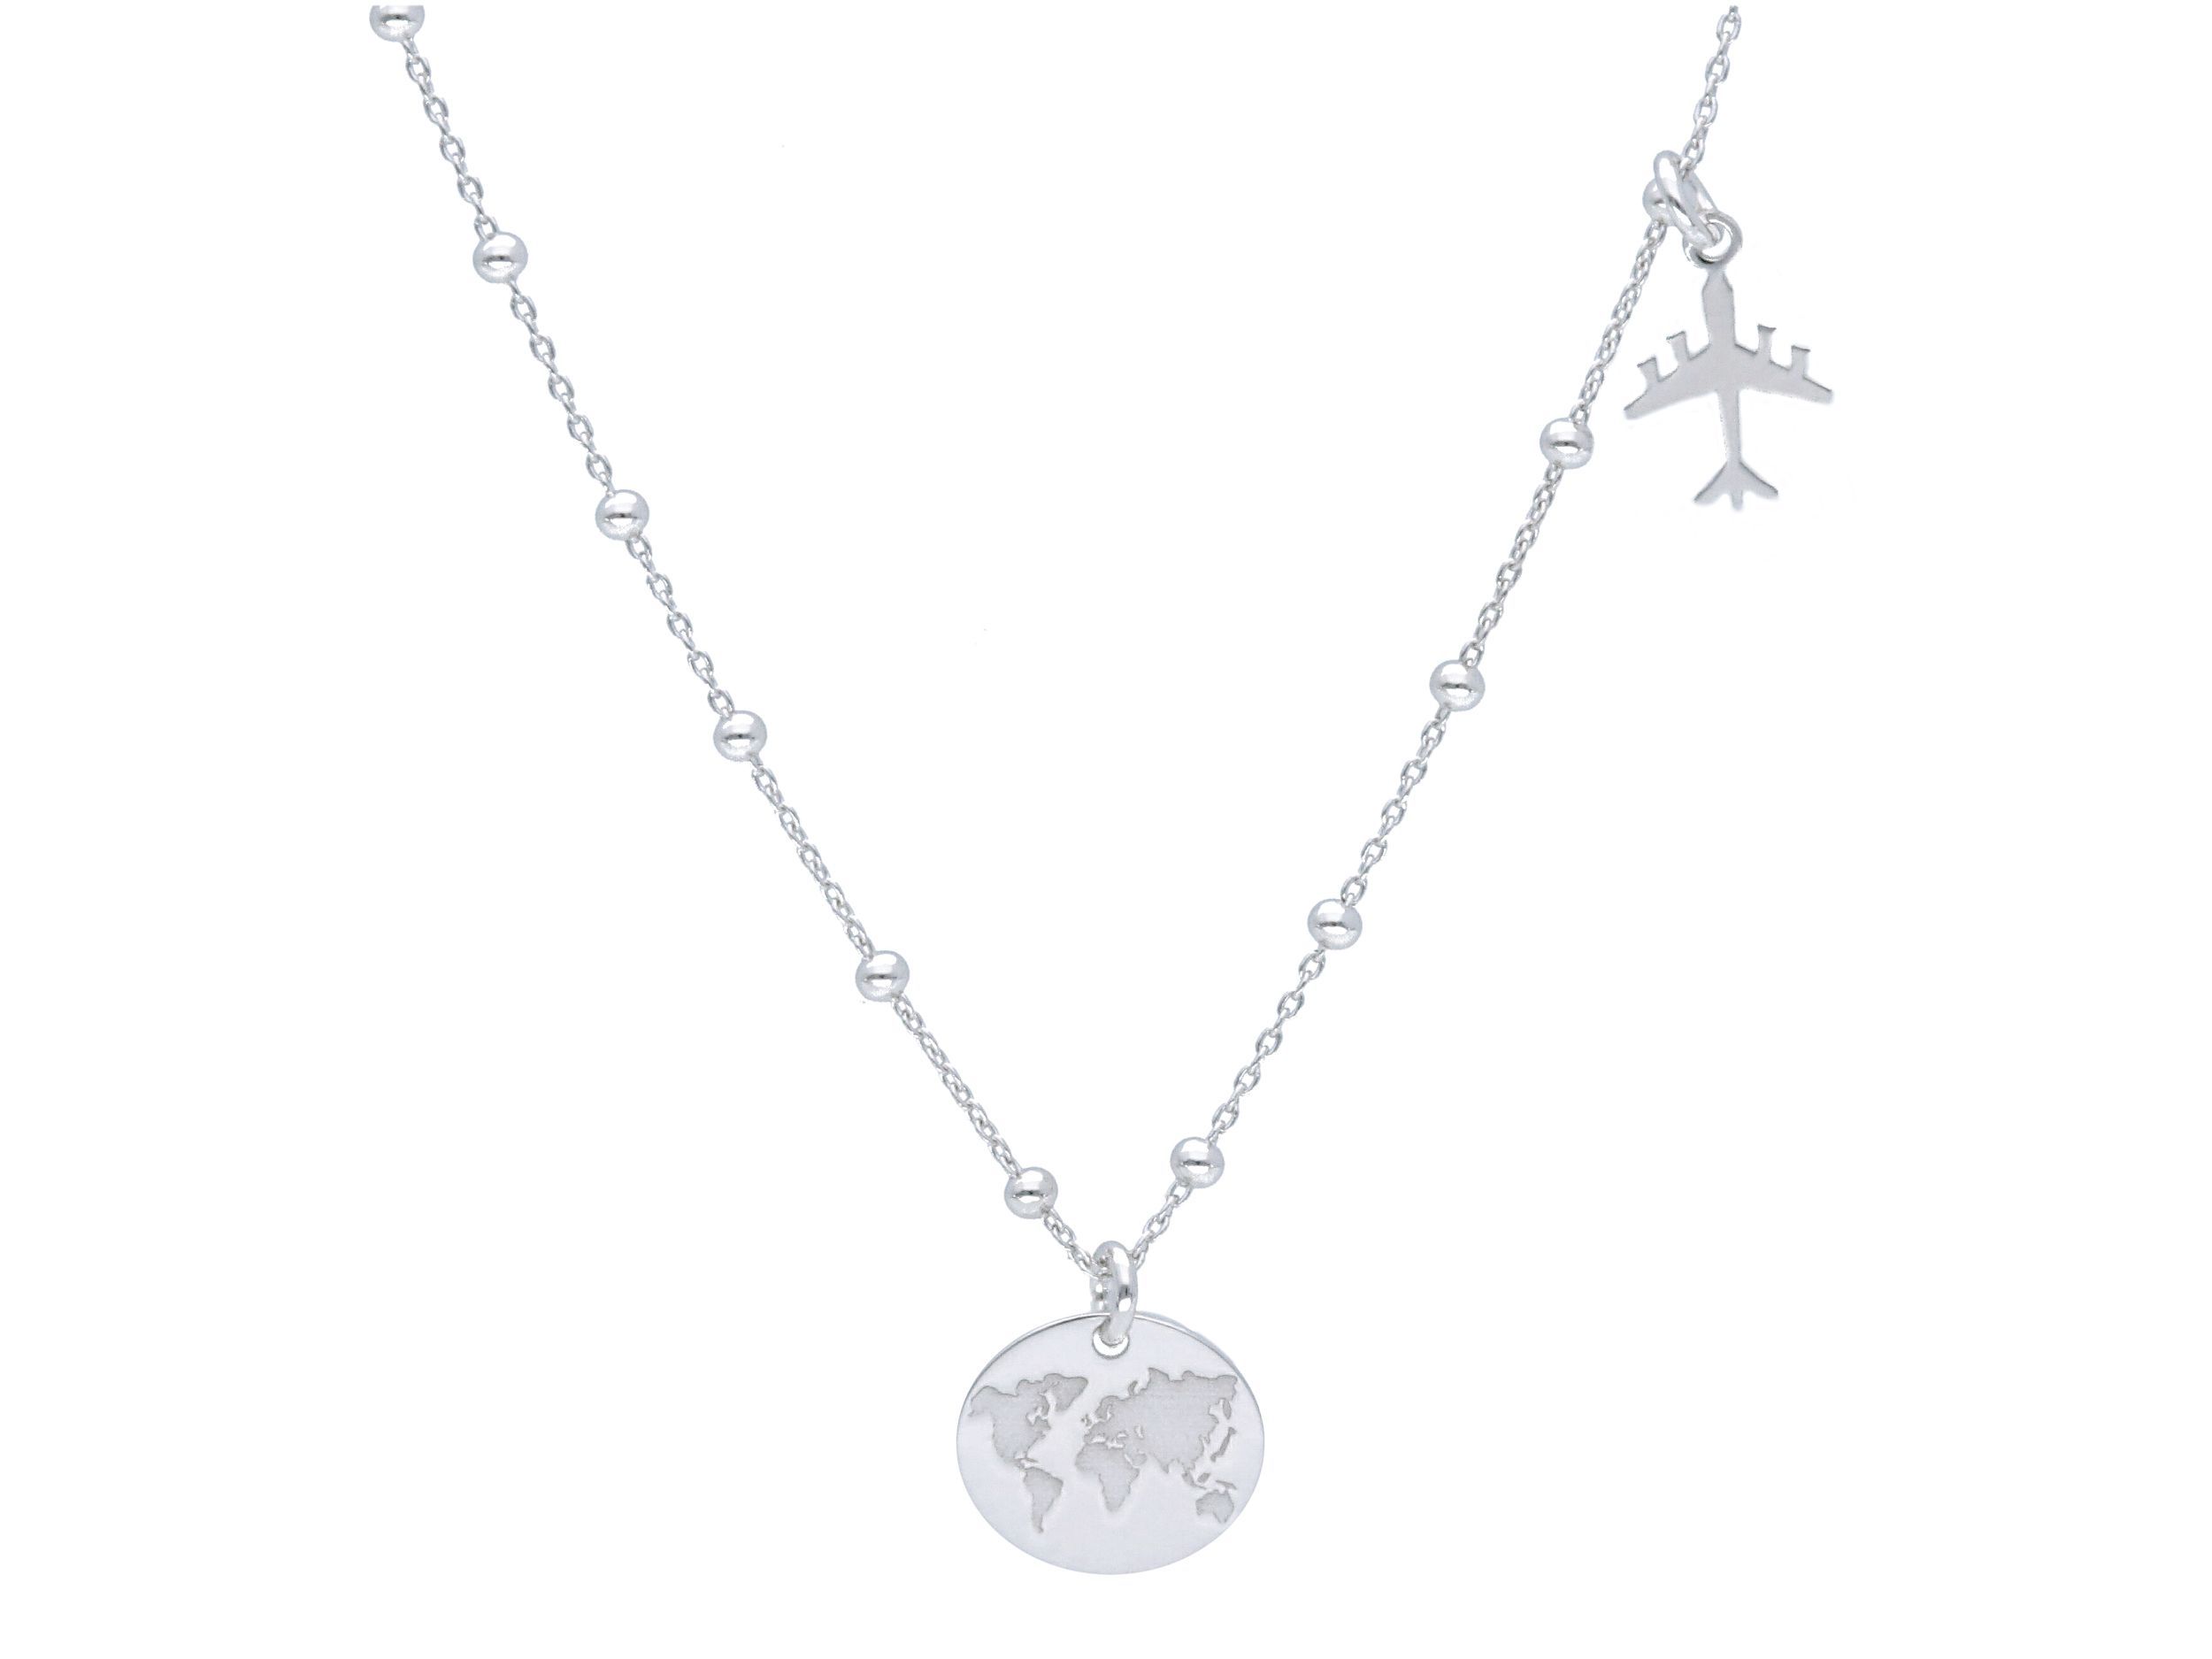  Platinum plated silver 925° necklace (code S233529)